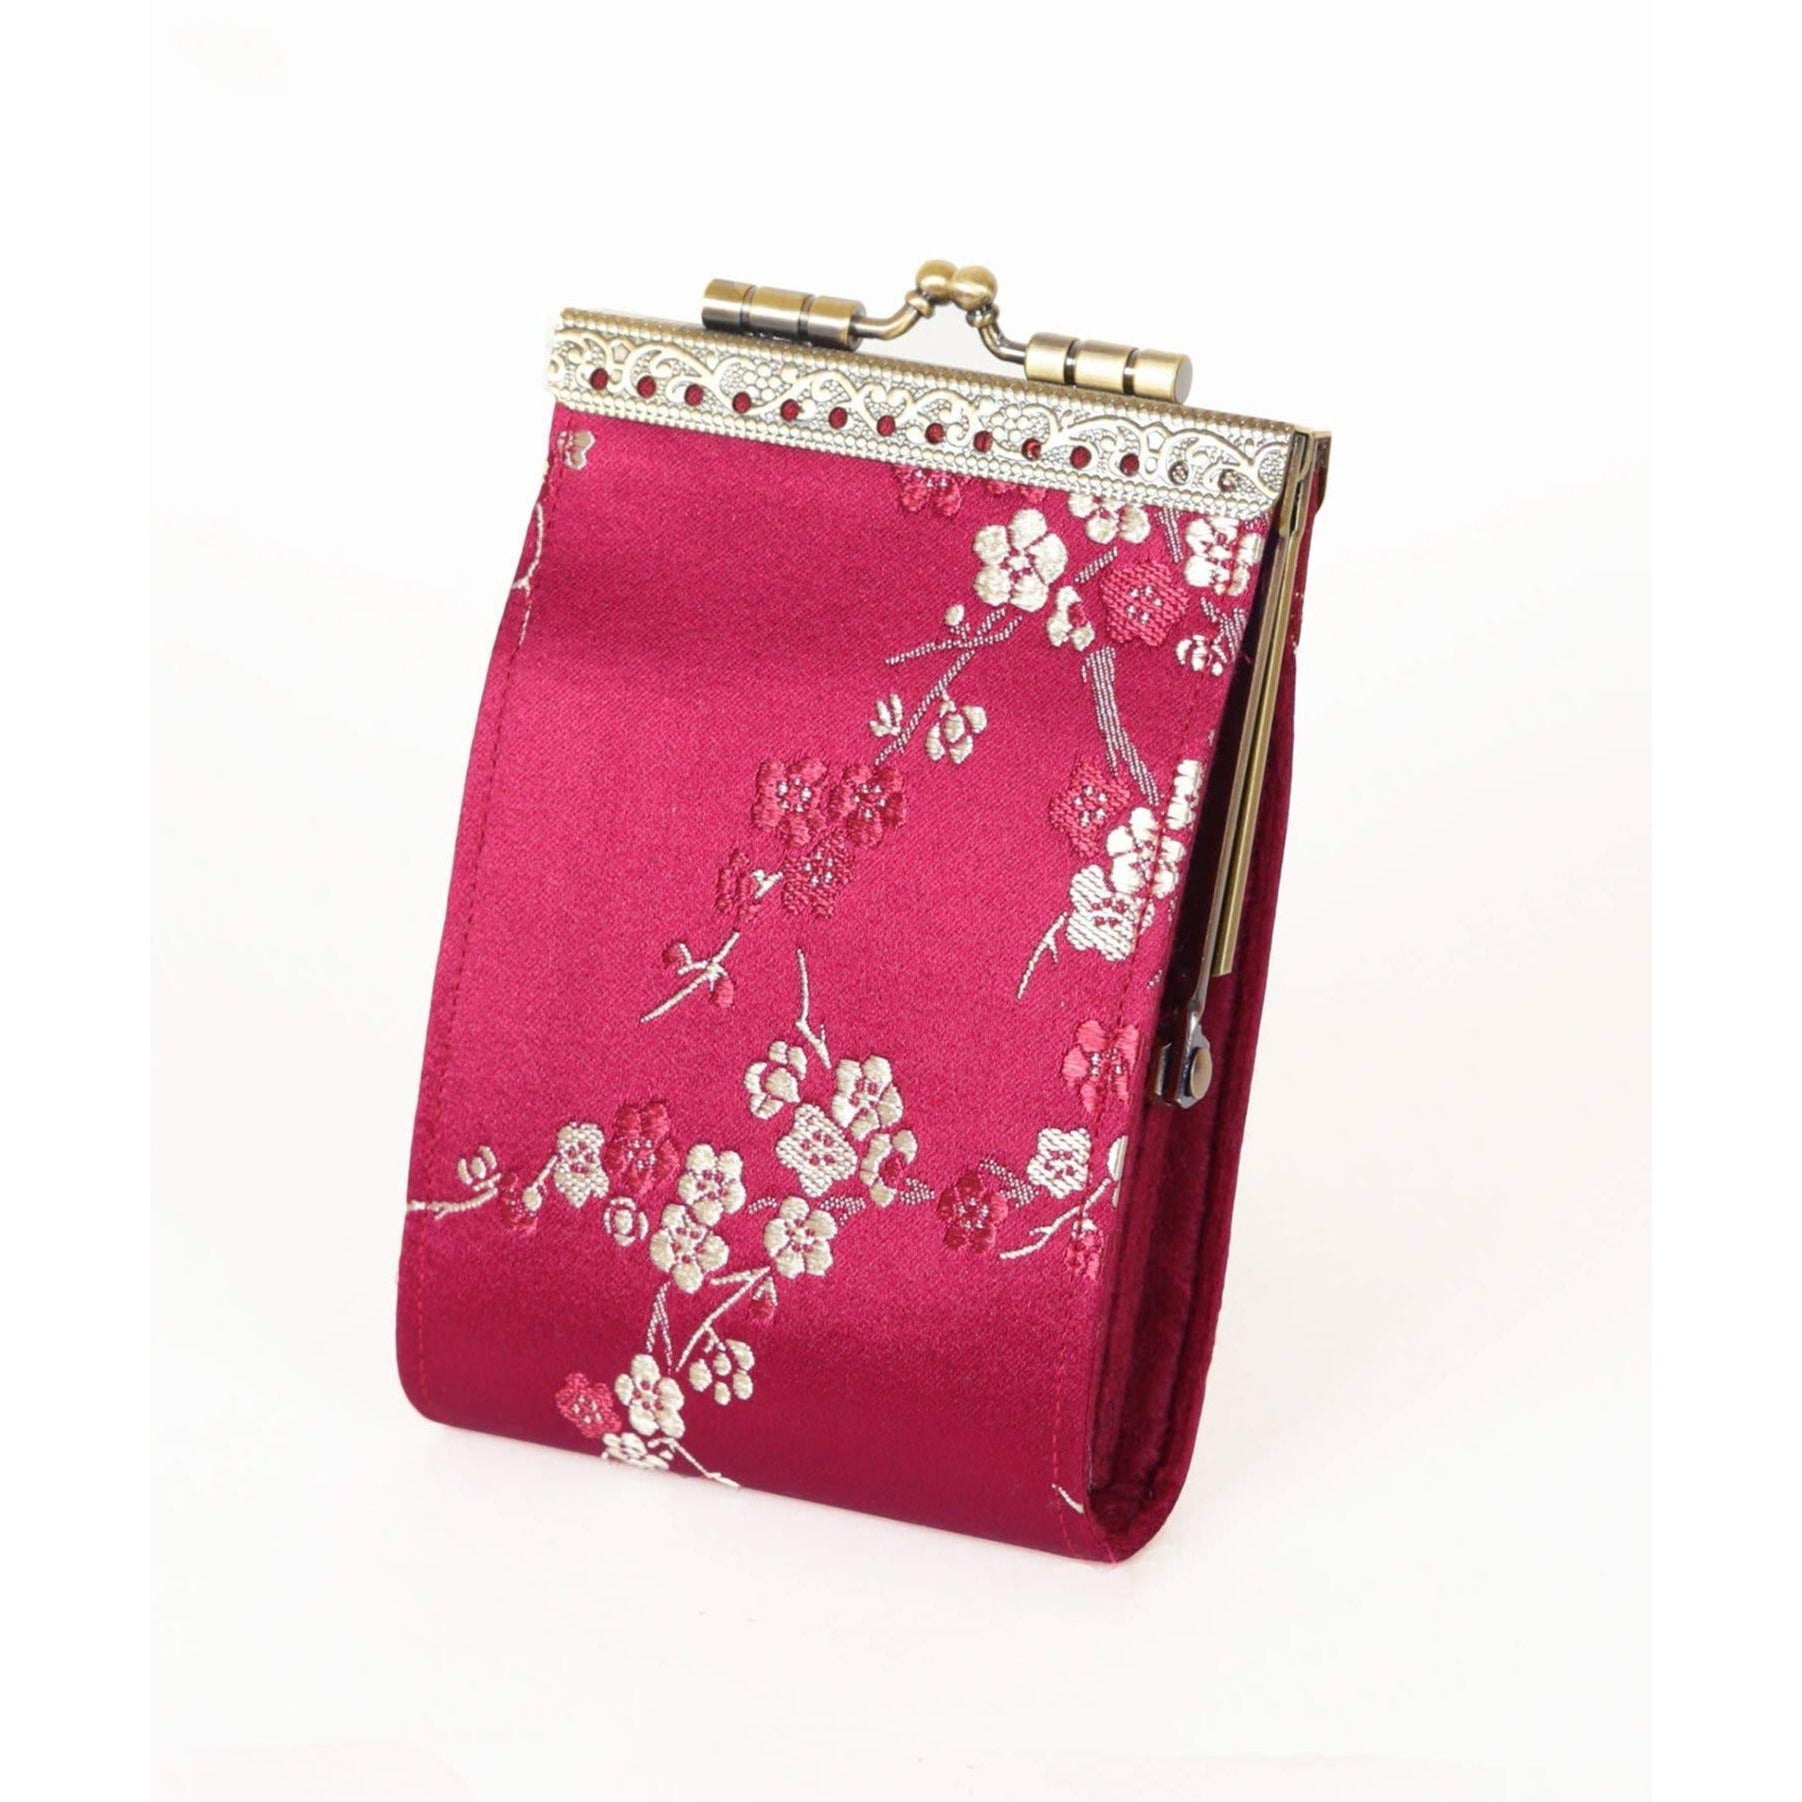 Pink Cherry Blossom Vintage Leather Long Wallet Organizer with Zipper Purse  Clutch Bag for Women Men